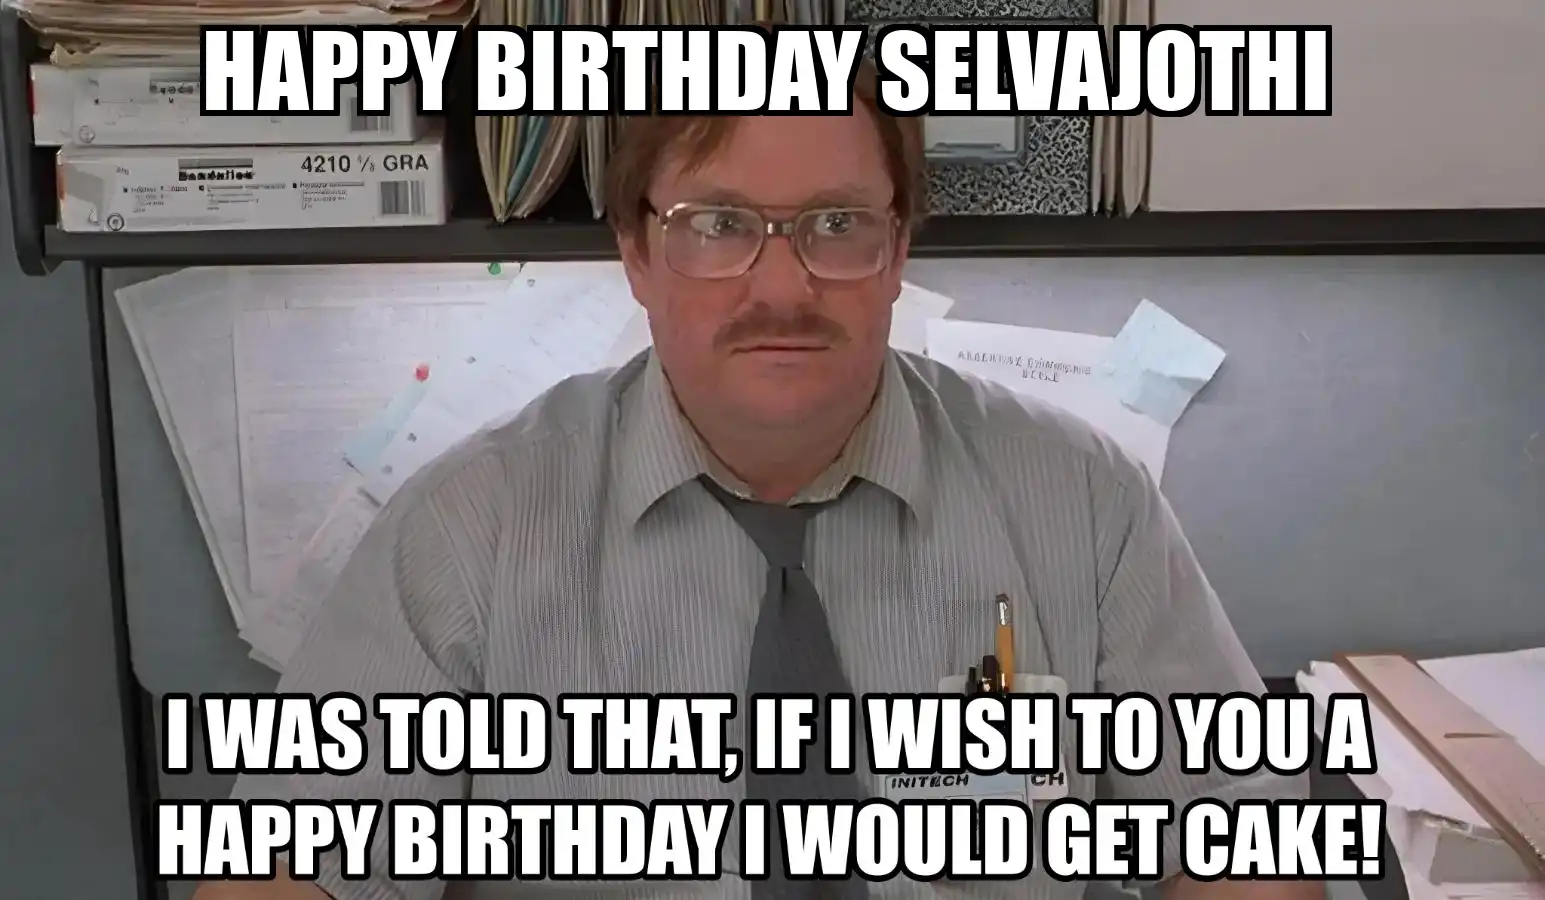 Happy Birthday Selvajothi I Would Get A Cake Meme